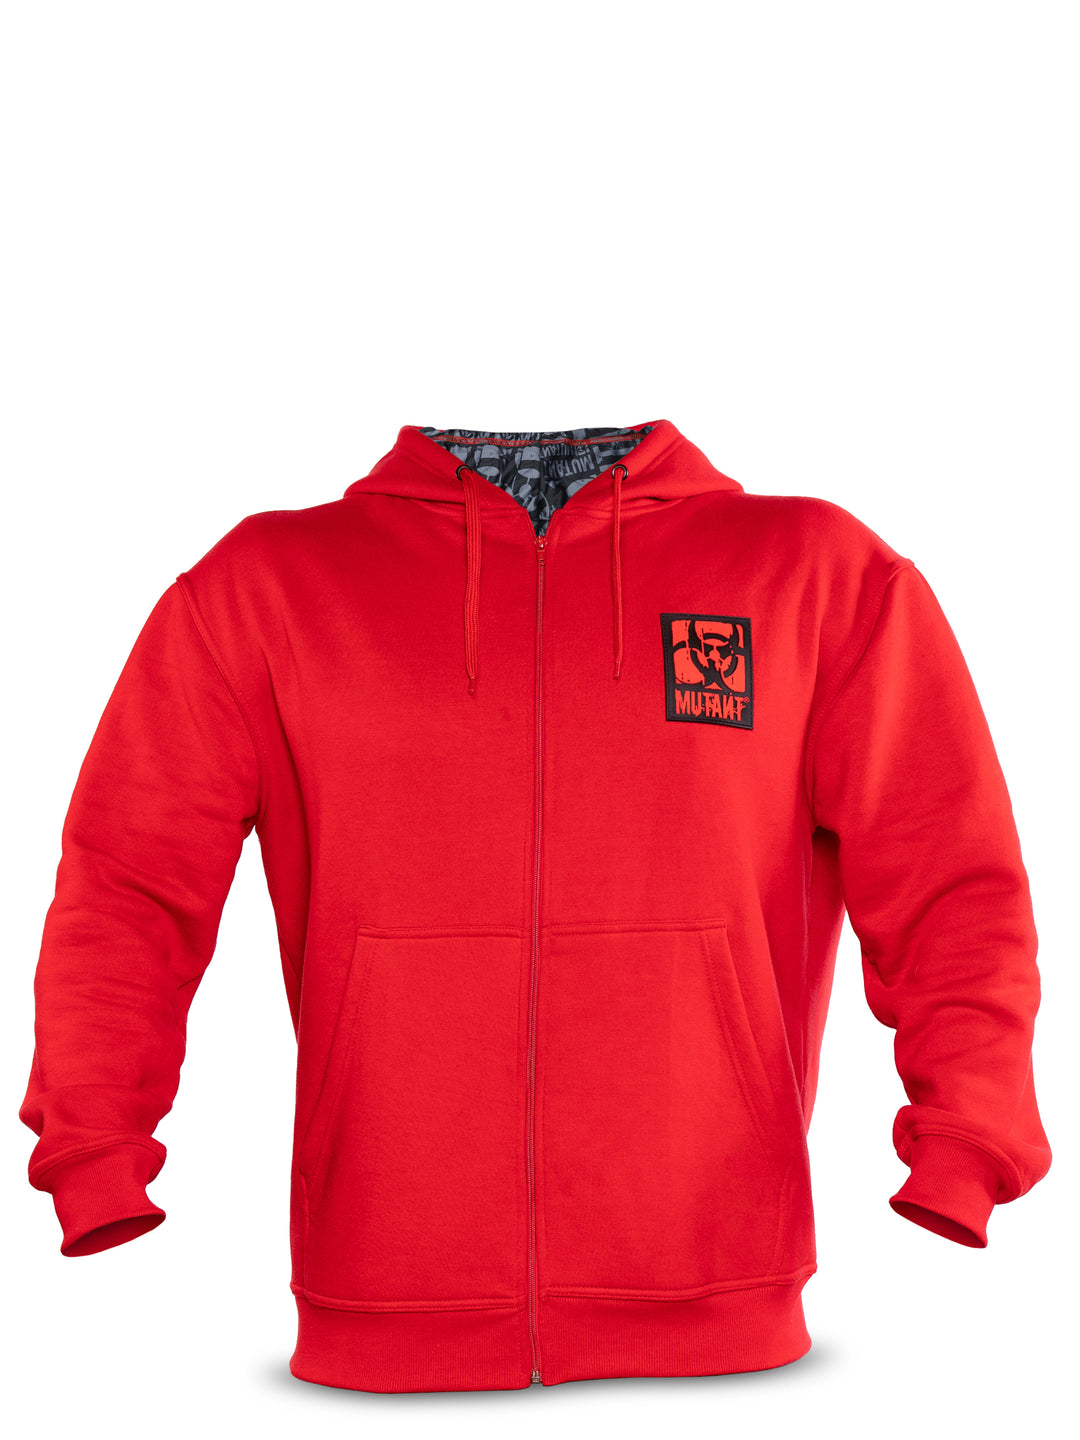  Front view of Red Mutant Patched Zip-Up Gym Hoodie with black and red logo patch on the left chest, two pockets, and grey internal hood lining with black Mutant logo. White background.